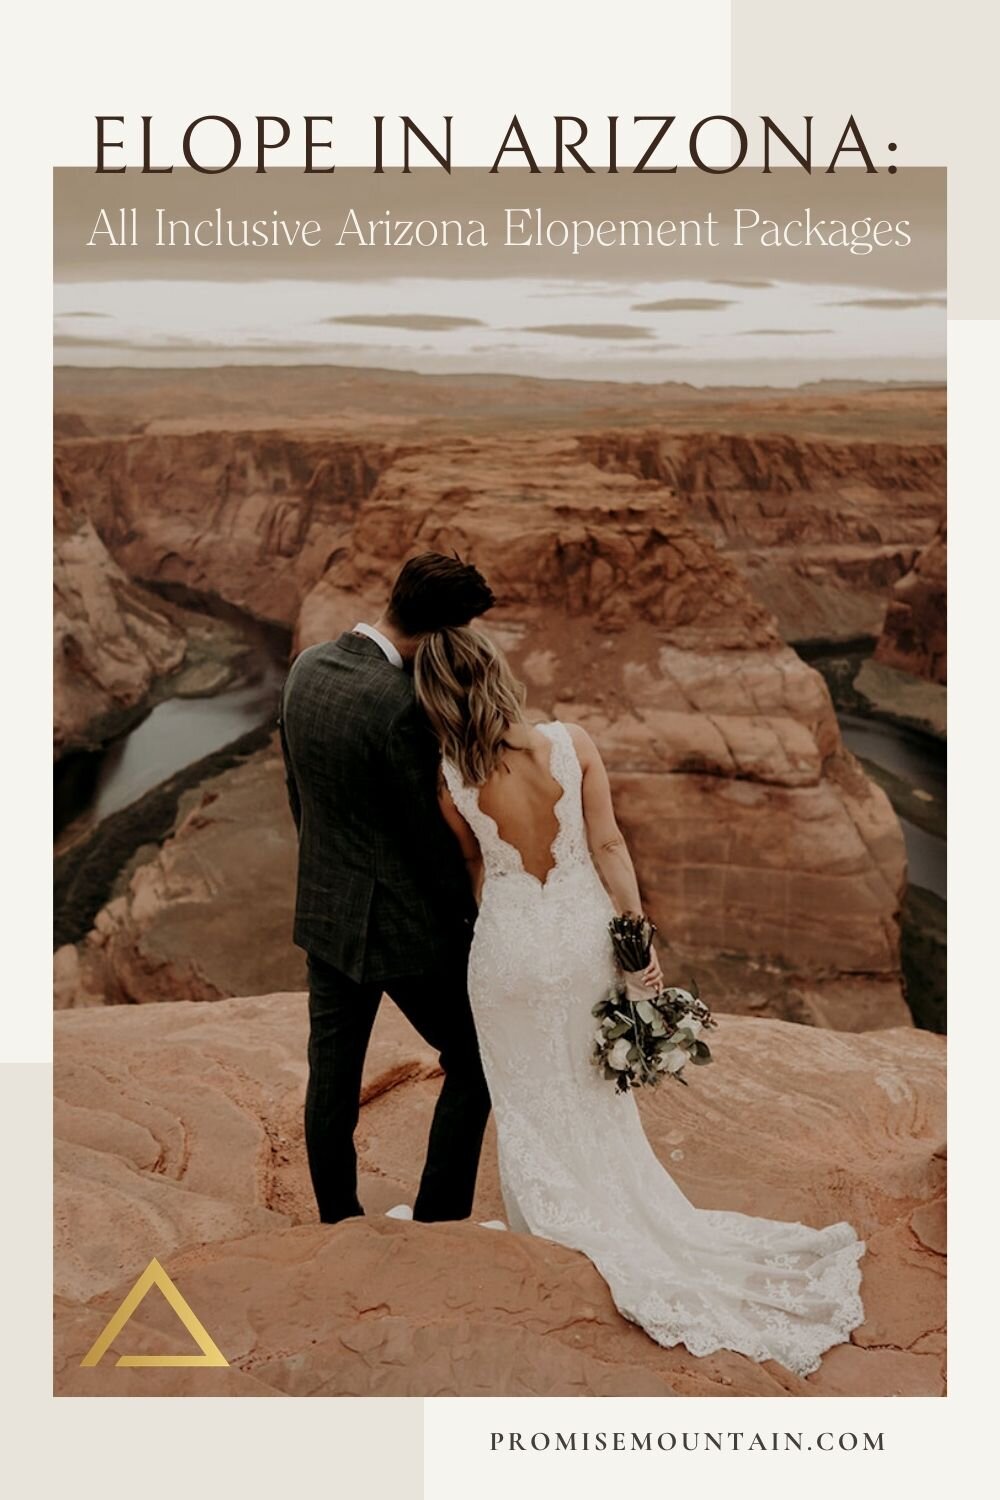 Bride rests her head on grooms shoulder as they look at Horseshoe bend during their elopement; image overlaid with text that reads Elope in Arizona: All Inclusive Arizona Elopement Packages